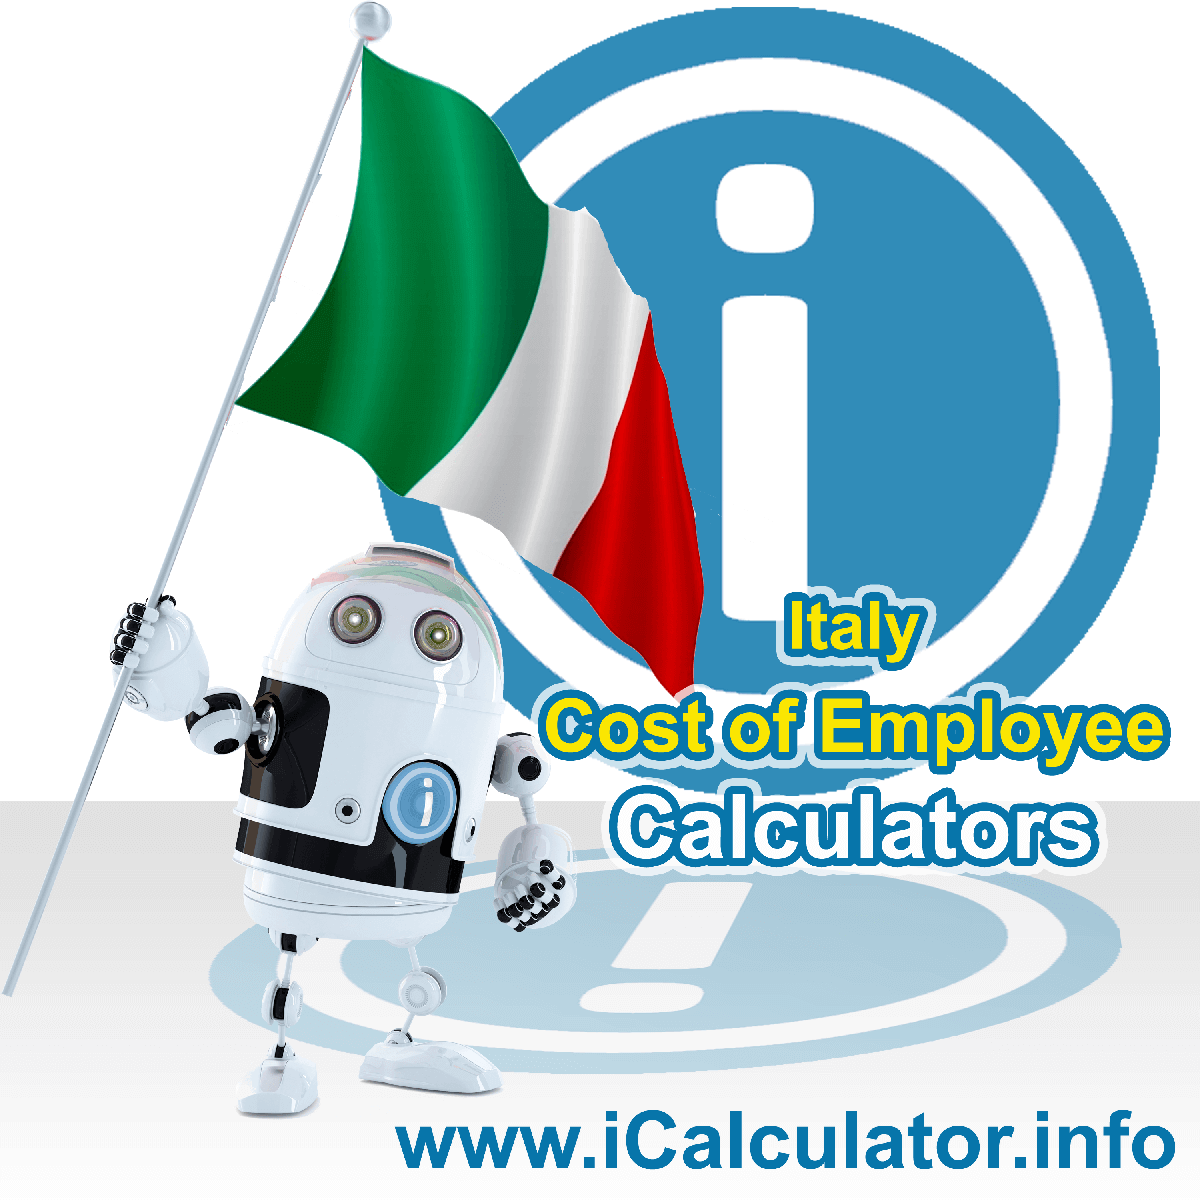 Italy Payroll Calculator. This image shows a new employer in Italy looking at payroll and human resource services in Italy as they want to hire an employee in Italy but are not sure of the employment costs. So, they make use of the Italy payroll calculator to understand their employment cost in Italy in 2021